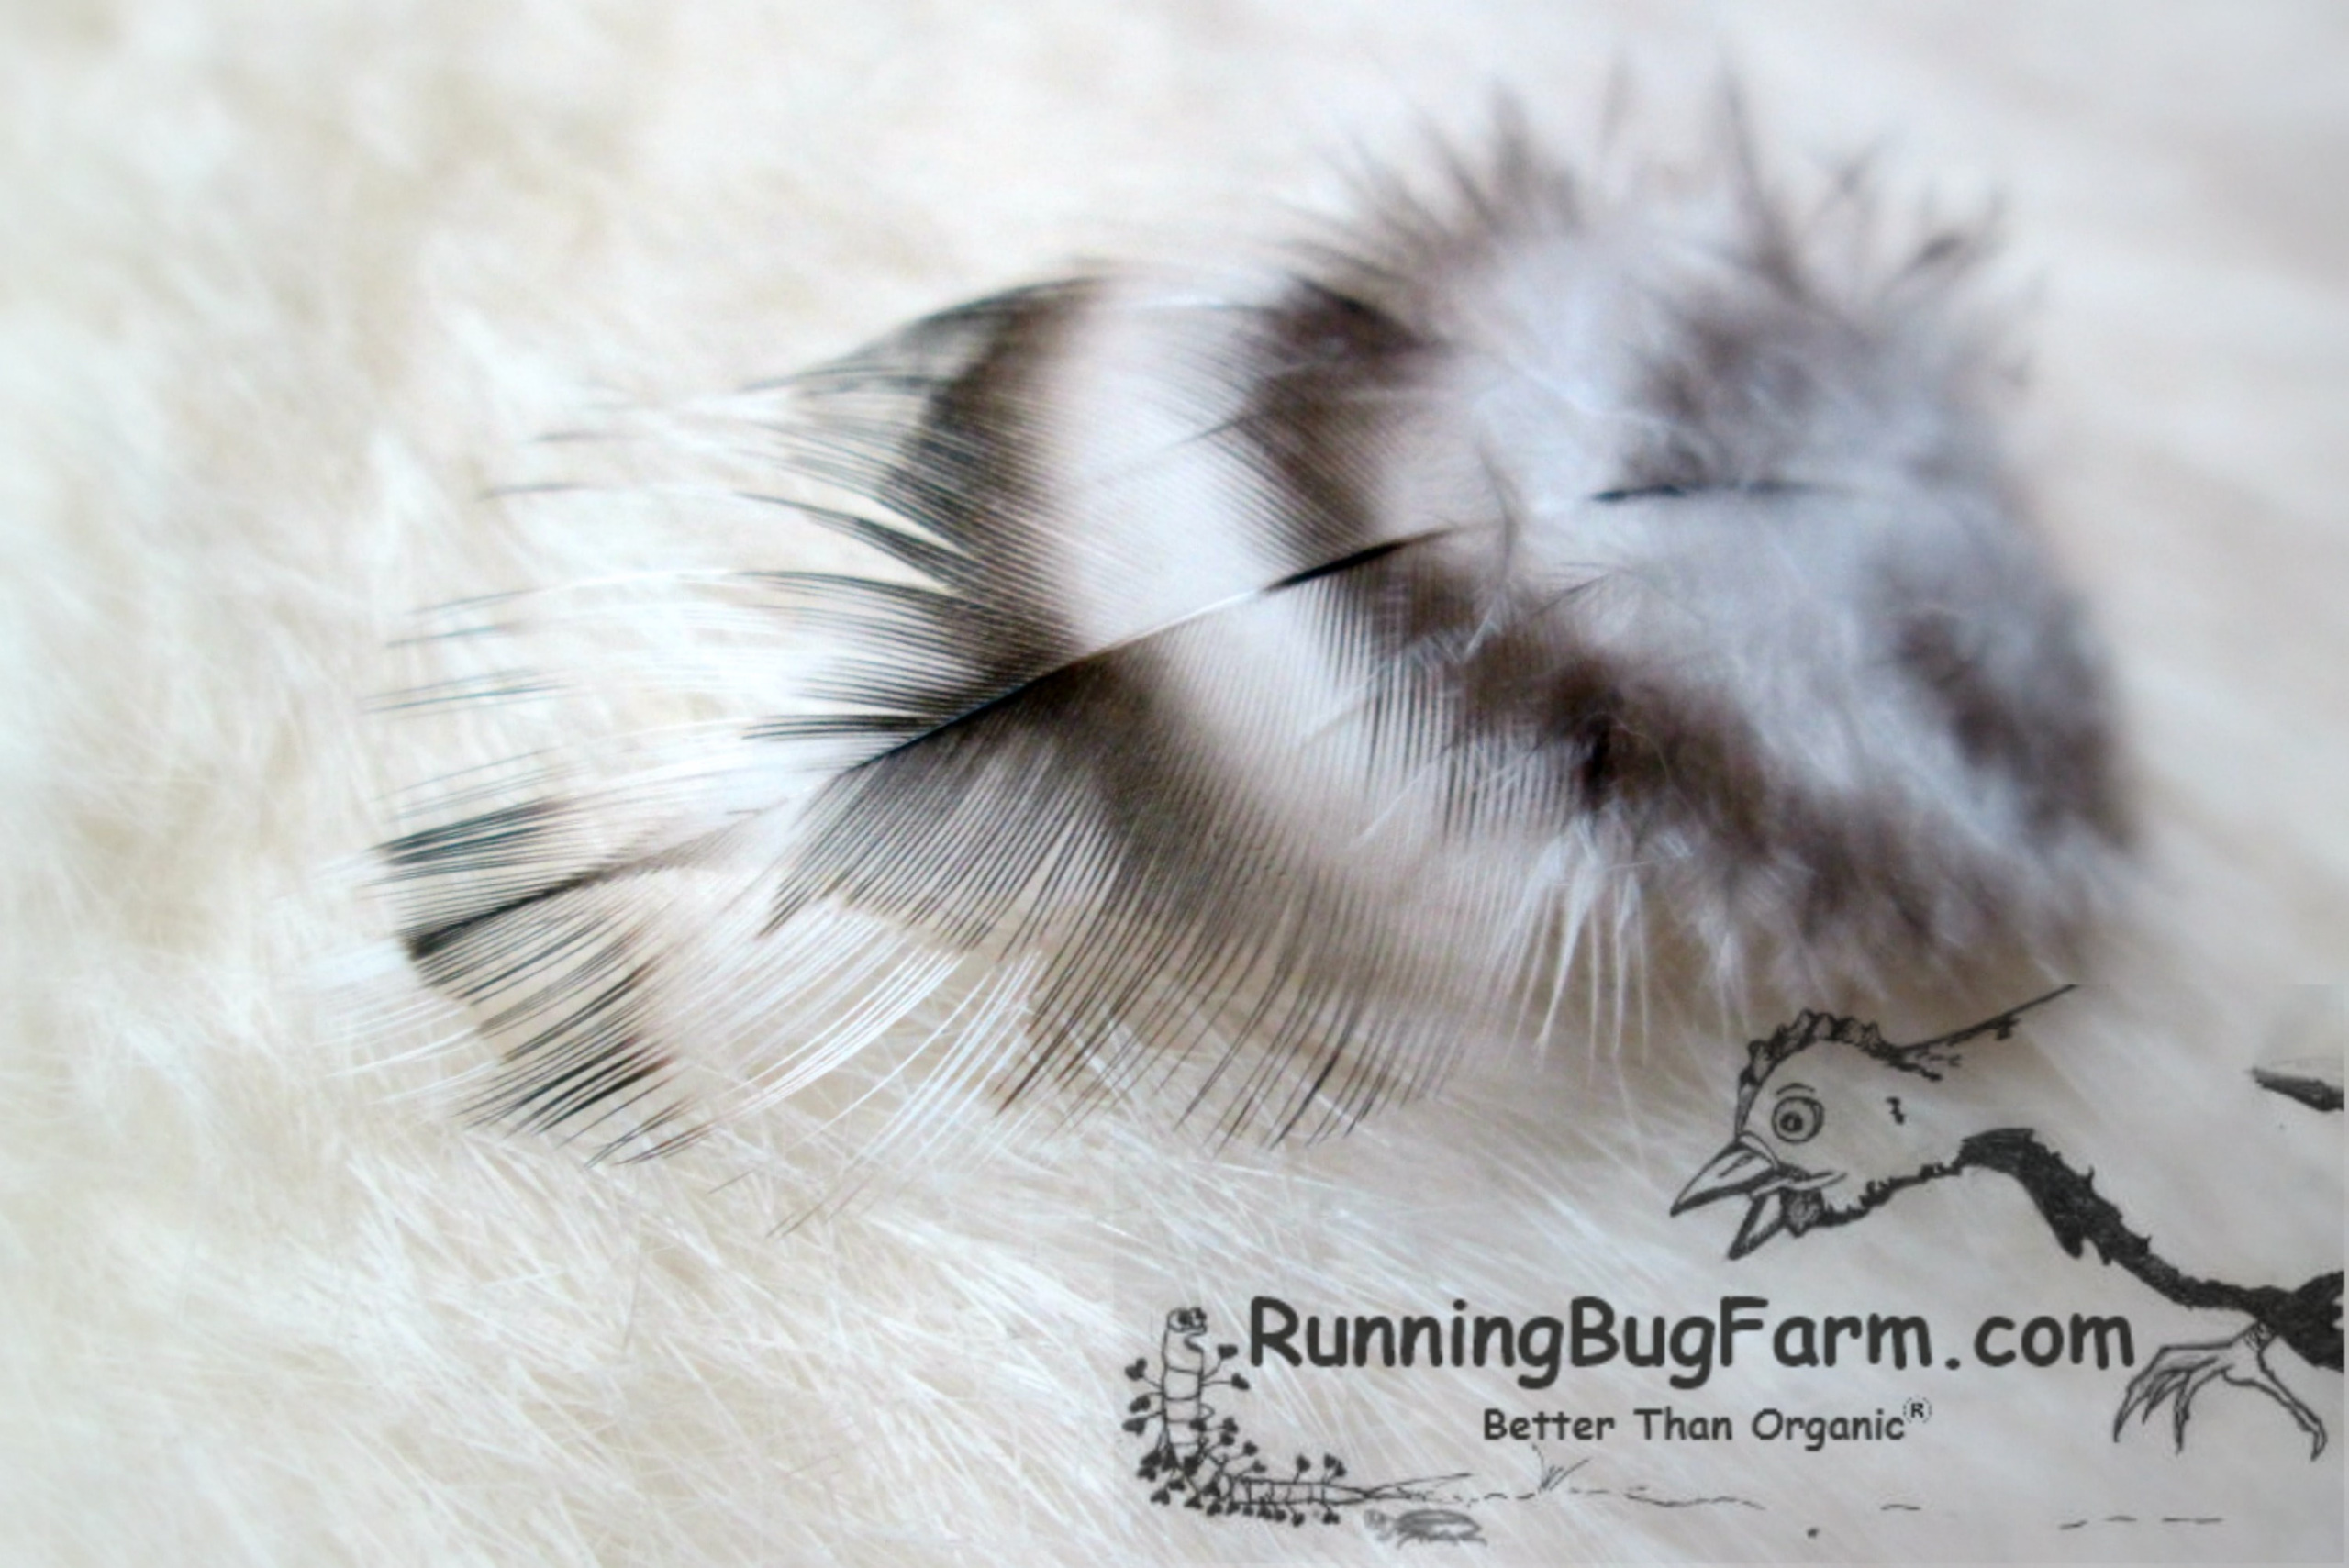 Black and White Shoulder and/or Back Rooster Feathers for Crafts